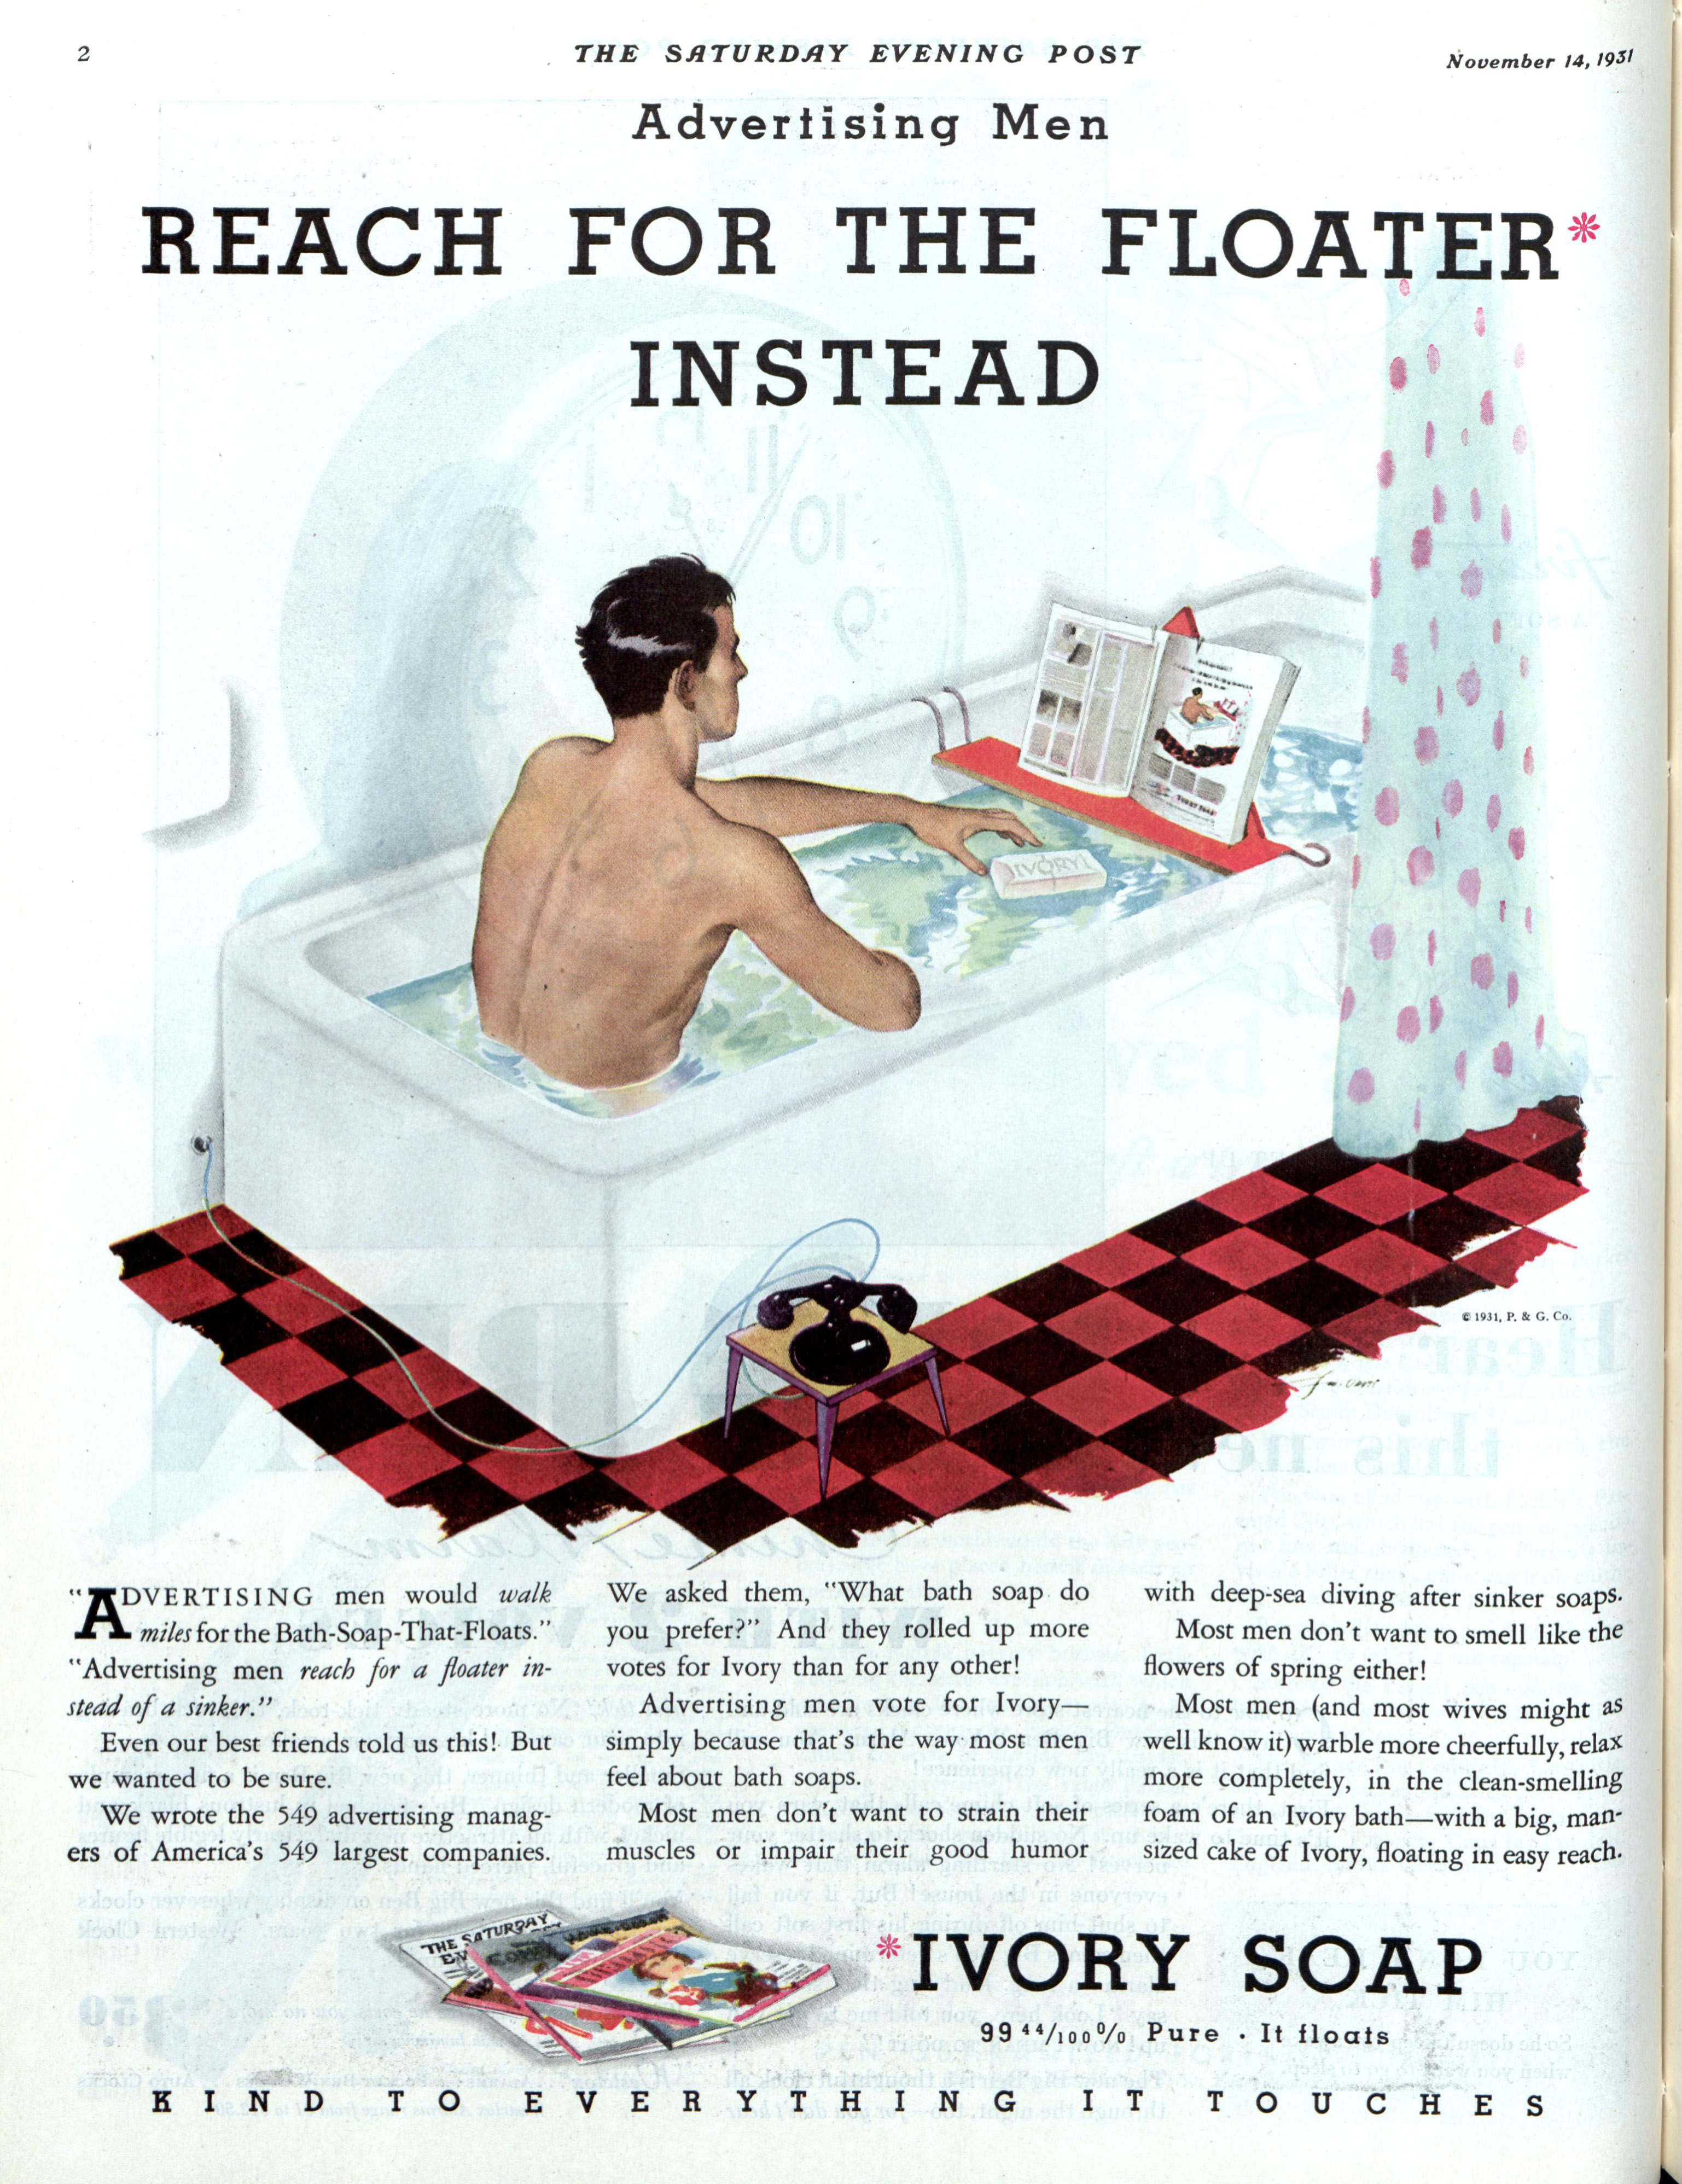 Vintage Ads: Ivory Soap | The Saturday Evening Post